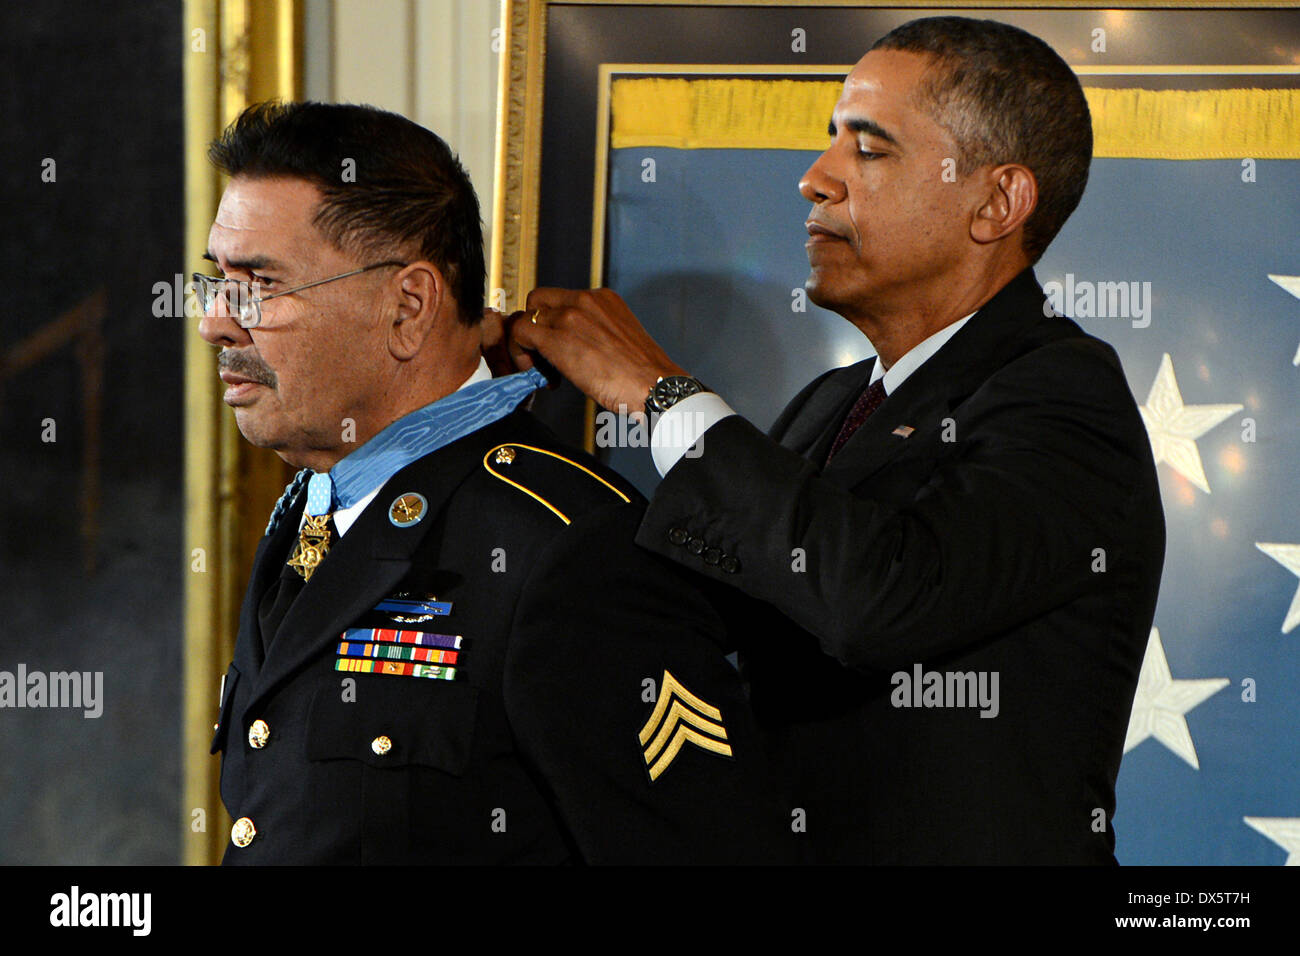 US President Barack Obama awards the Medal of Honor to Sgt. Santiago J. Erevia during a ceremony at the White House March 18, 2014 in Washington D.C. Erevia earned the Medal of Honor for his courageous actions while serving as radio telephone operator during a search and clear mission near Tam Ky, Republic of Vietnam May 21, 1969. Stock Photo